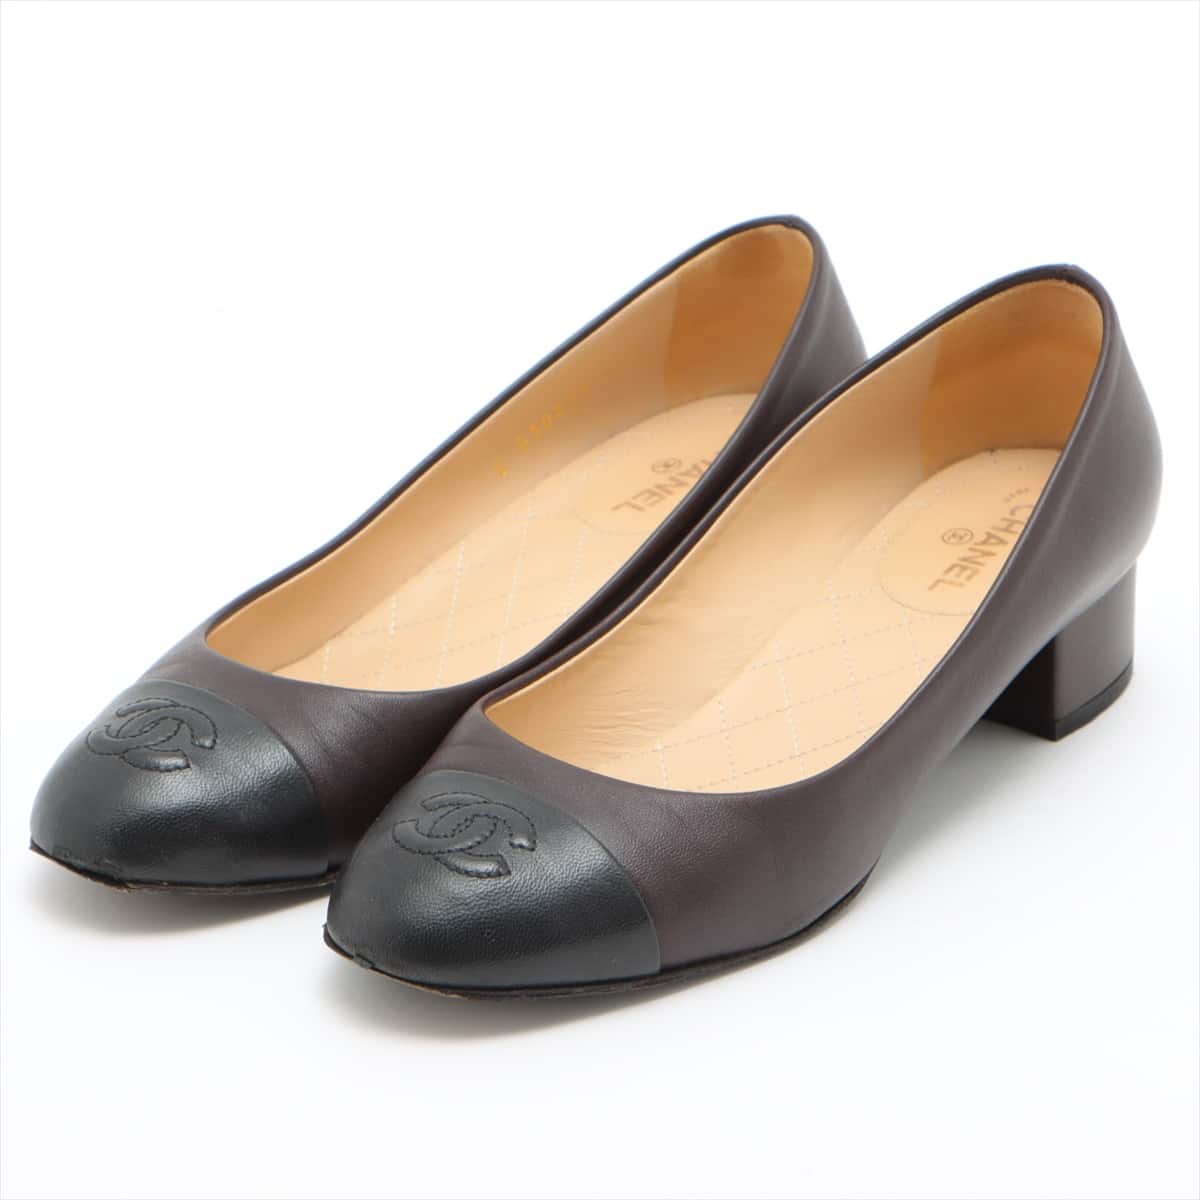 Chanel Coco Mark Leather Pumps 35 1/2 Ladies' Bordeaux x black G30239 outsole? There is peeling